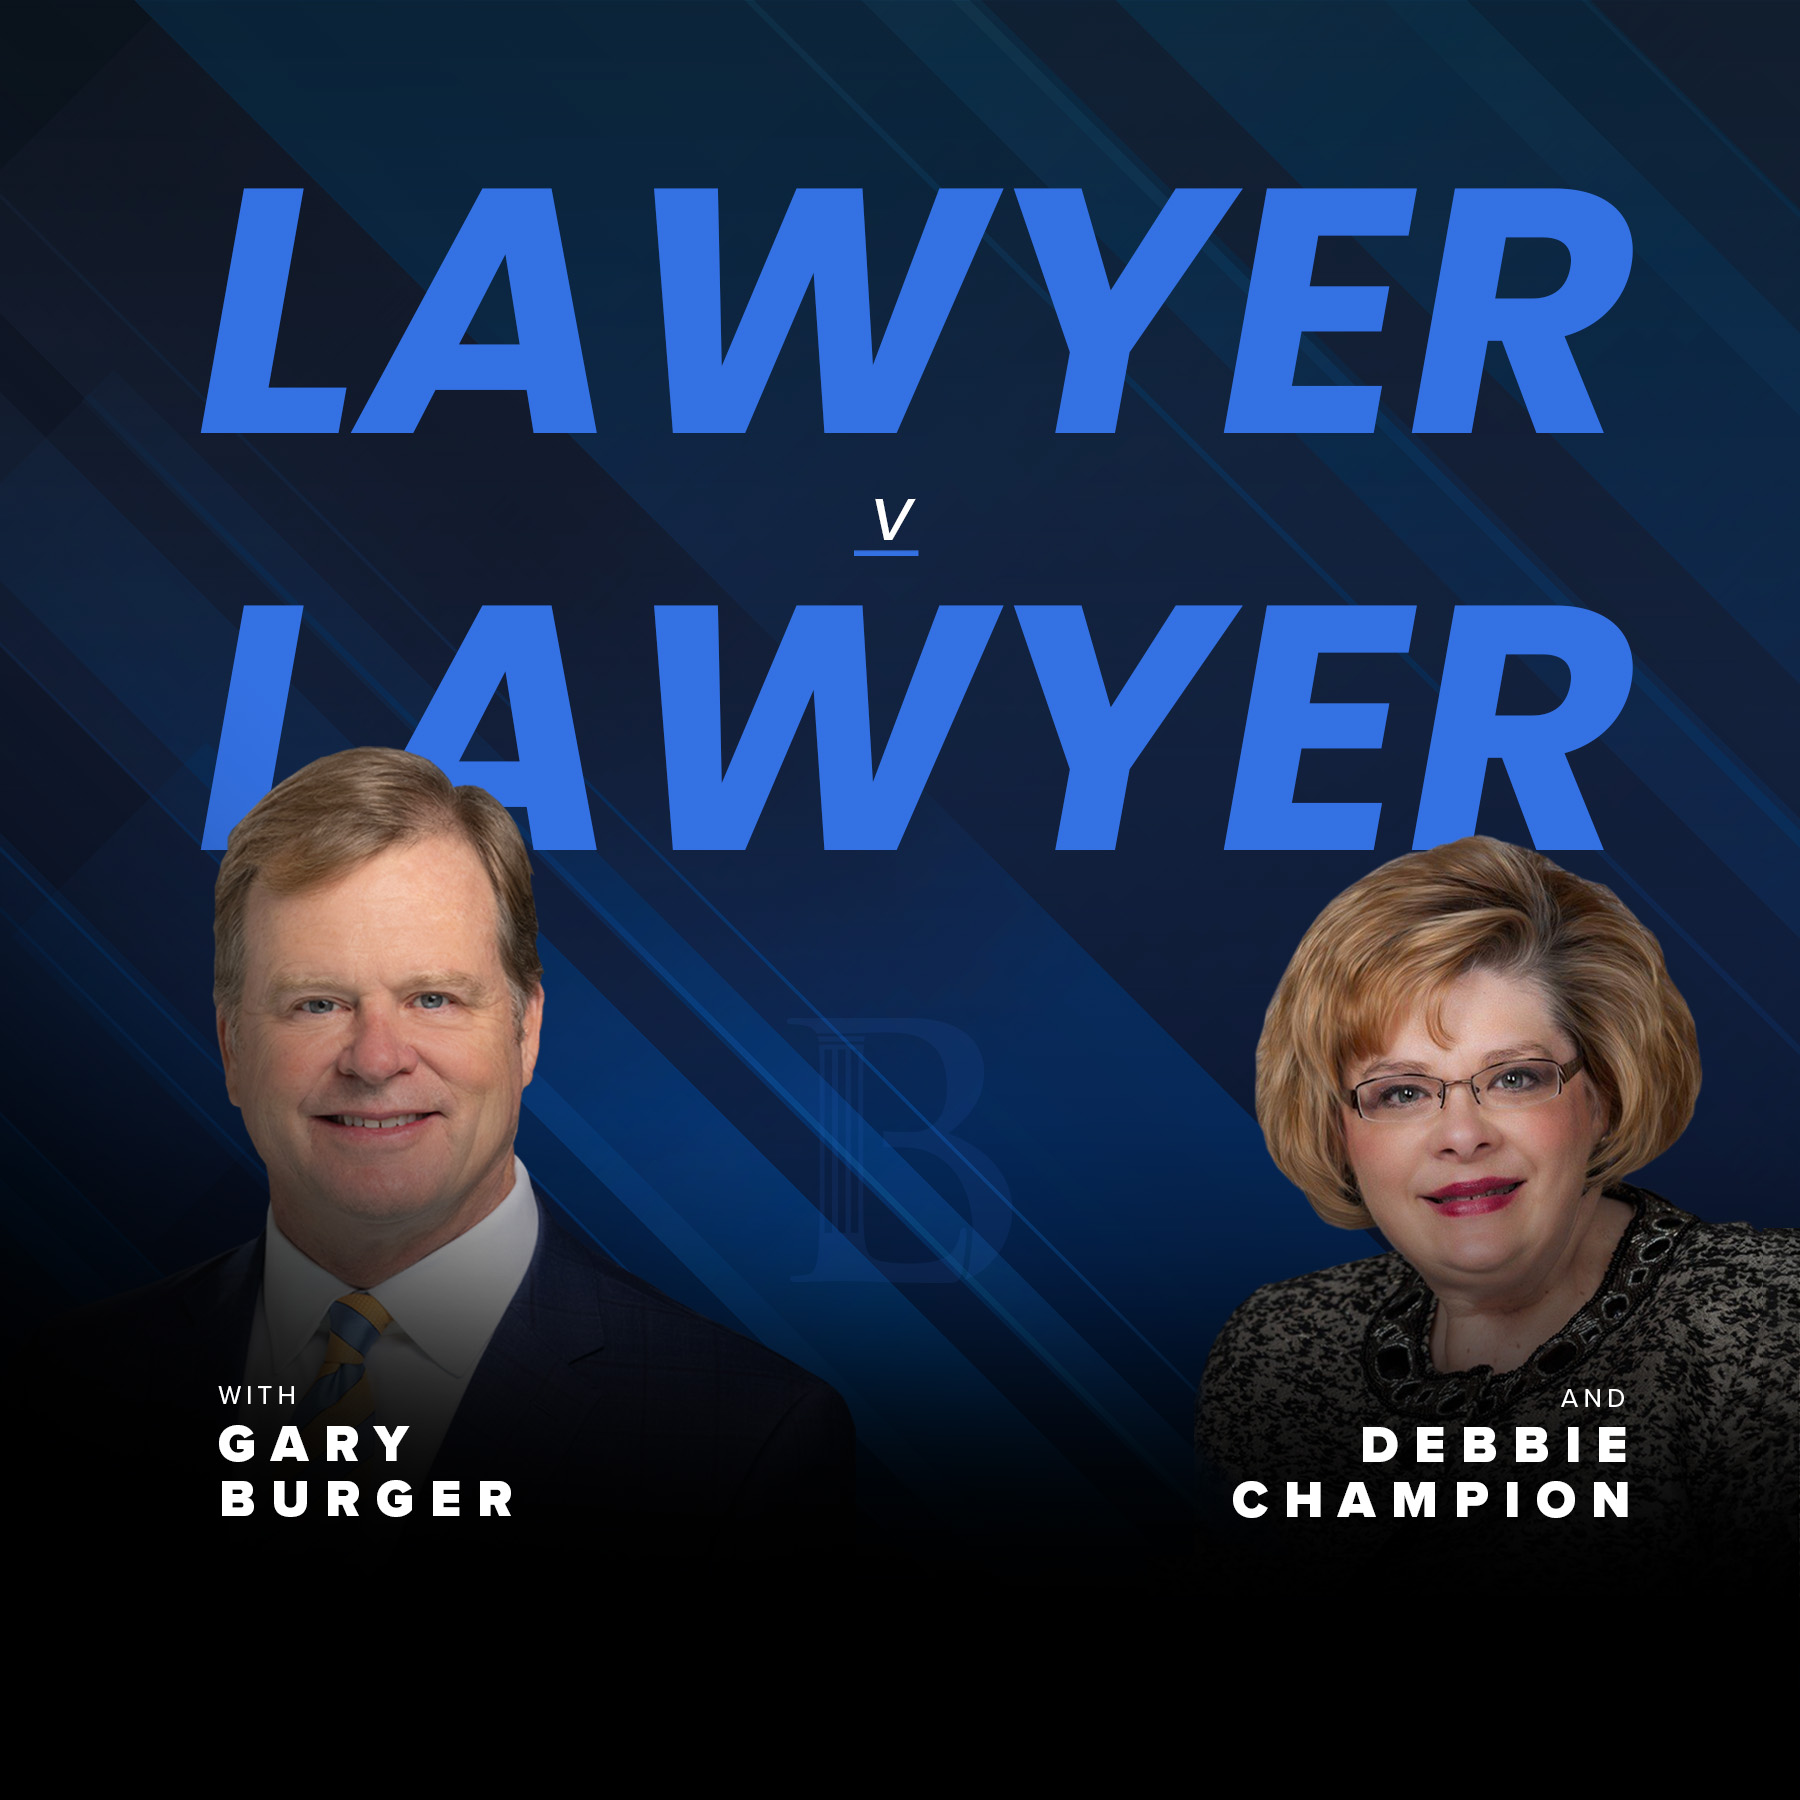 lawyer podcast